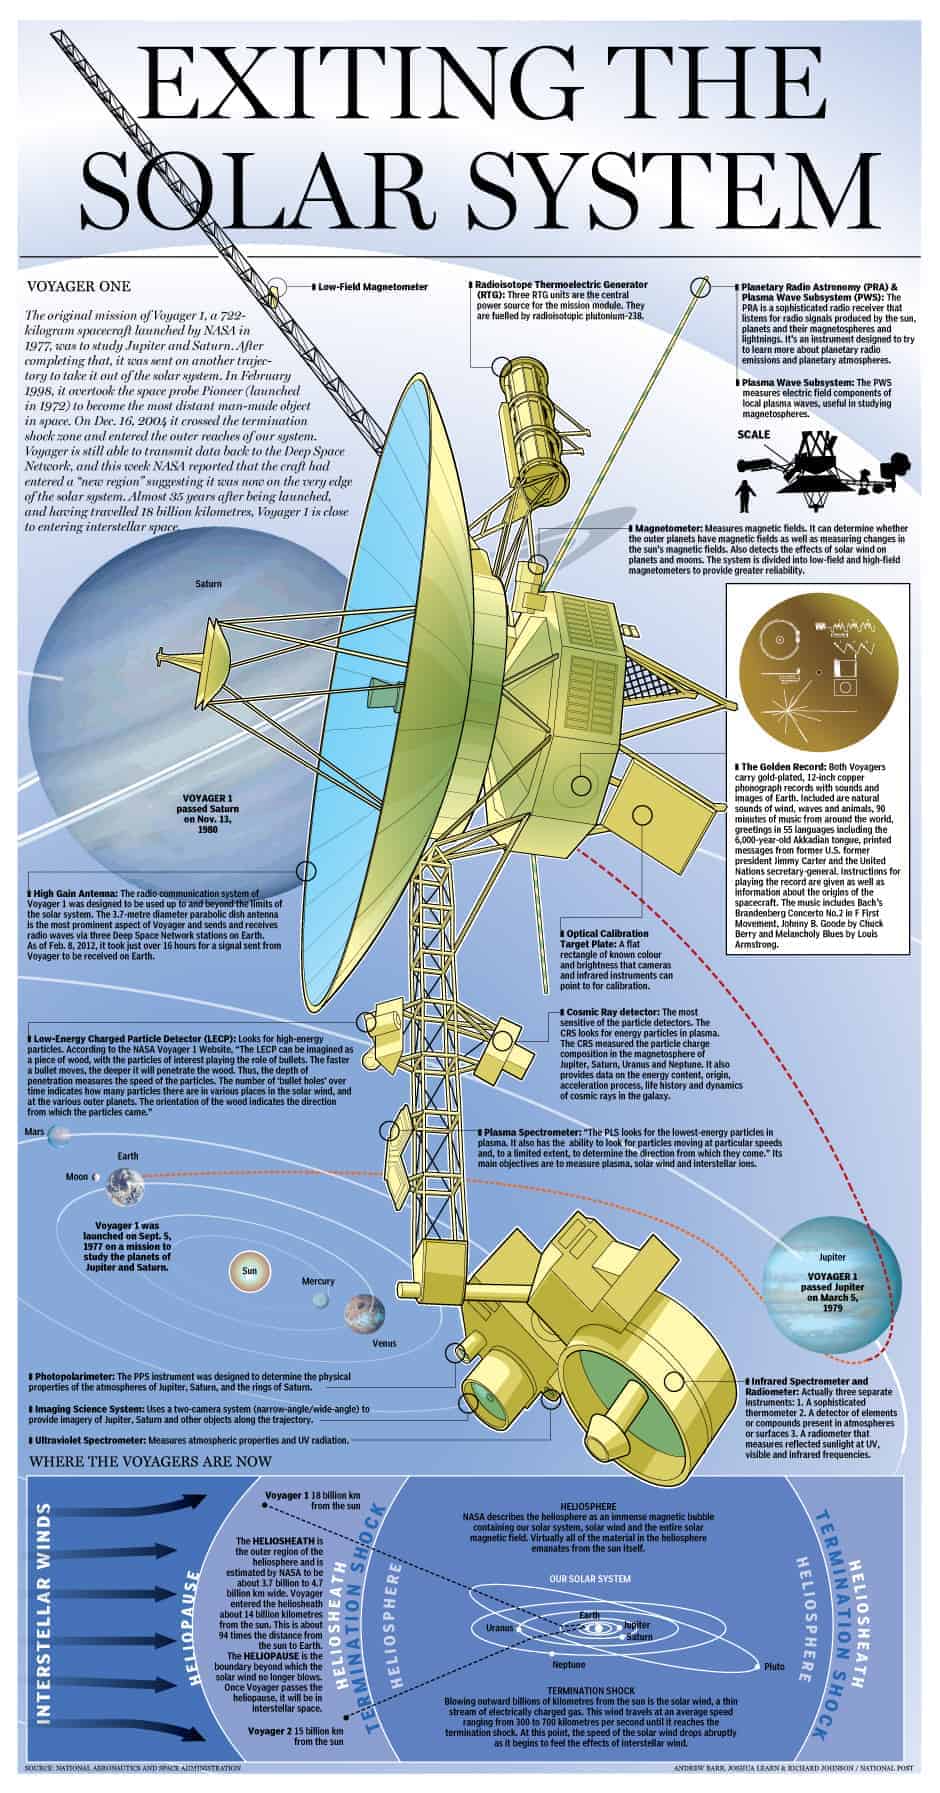 what did voyager 1 discover beyond our solar system